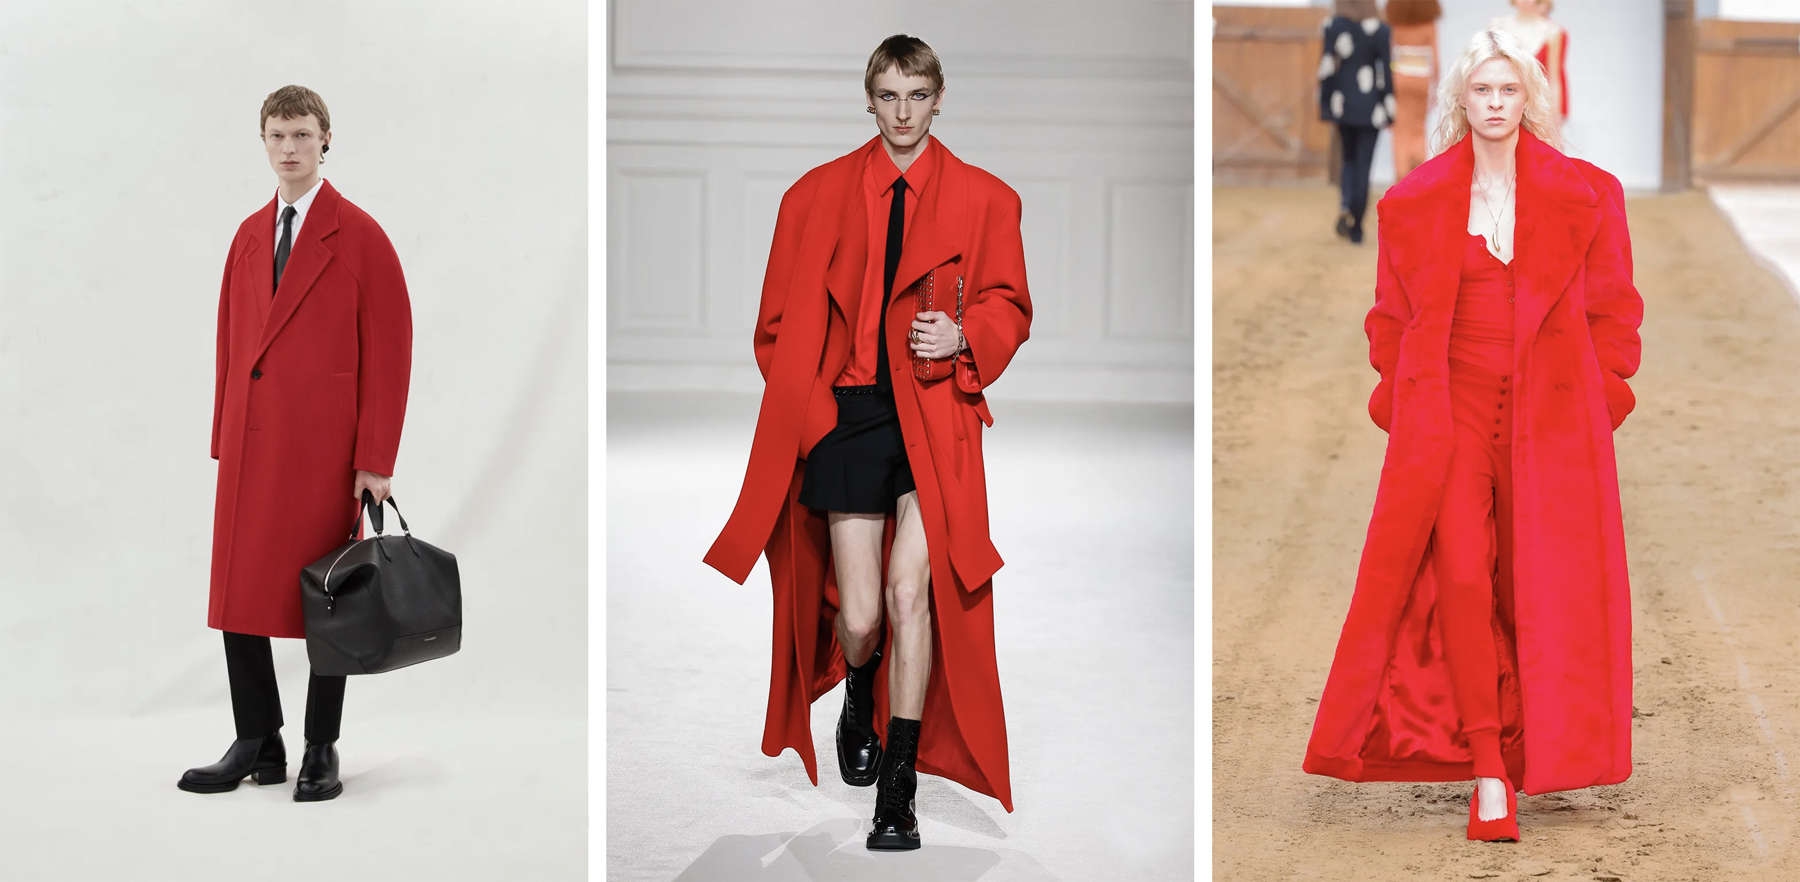 Everyone, everywhere, is wearing red head to toe: red coats are also making a statement in both women's and men's fashion. In these images, from left to right, three FW23 looks of Alexander McQueen by Sarah Burton, Valentino by Pierpaolo Piccioli and Stella McCartney